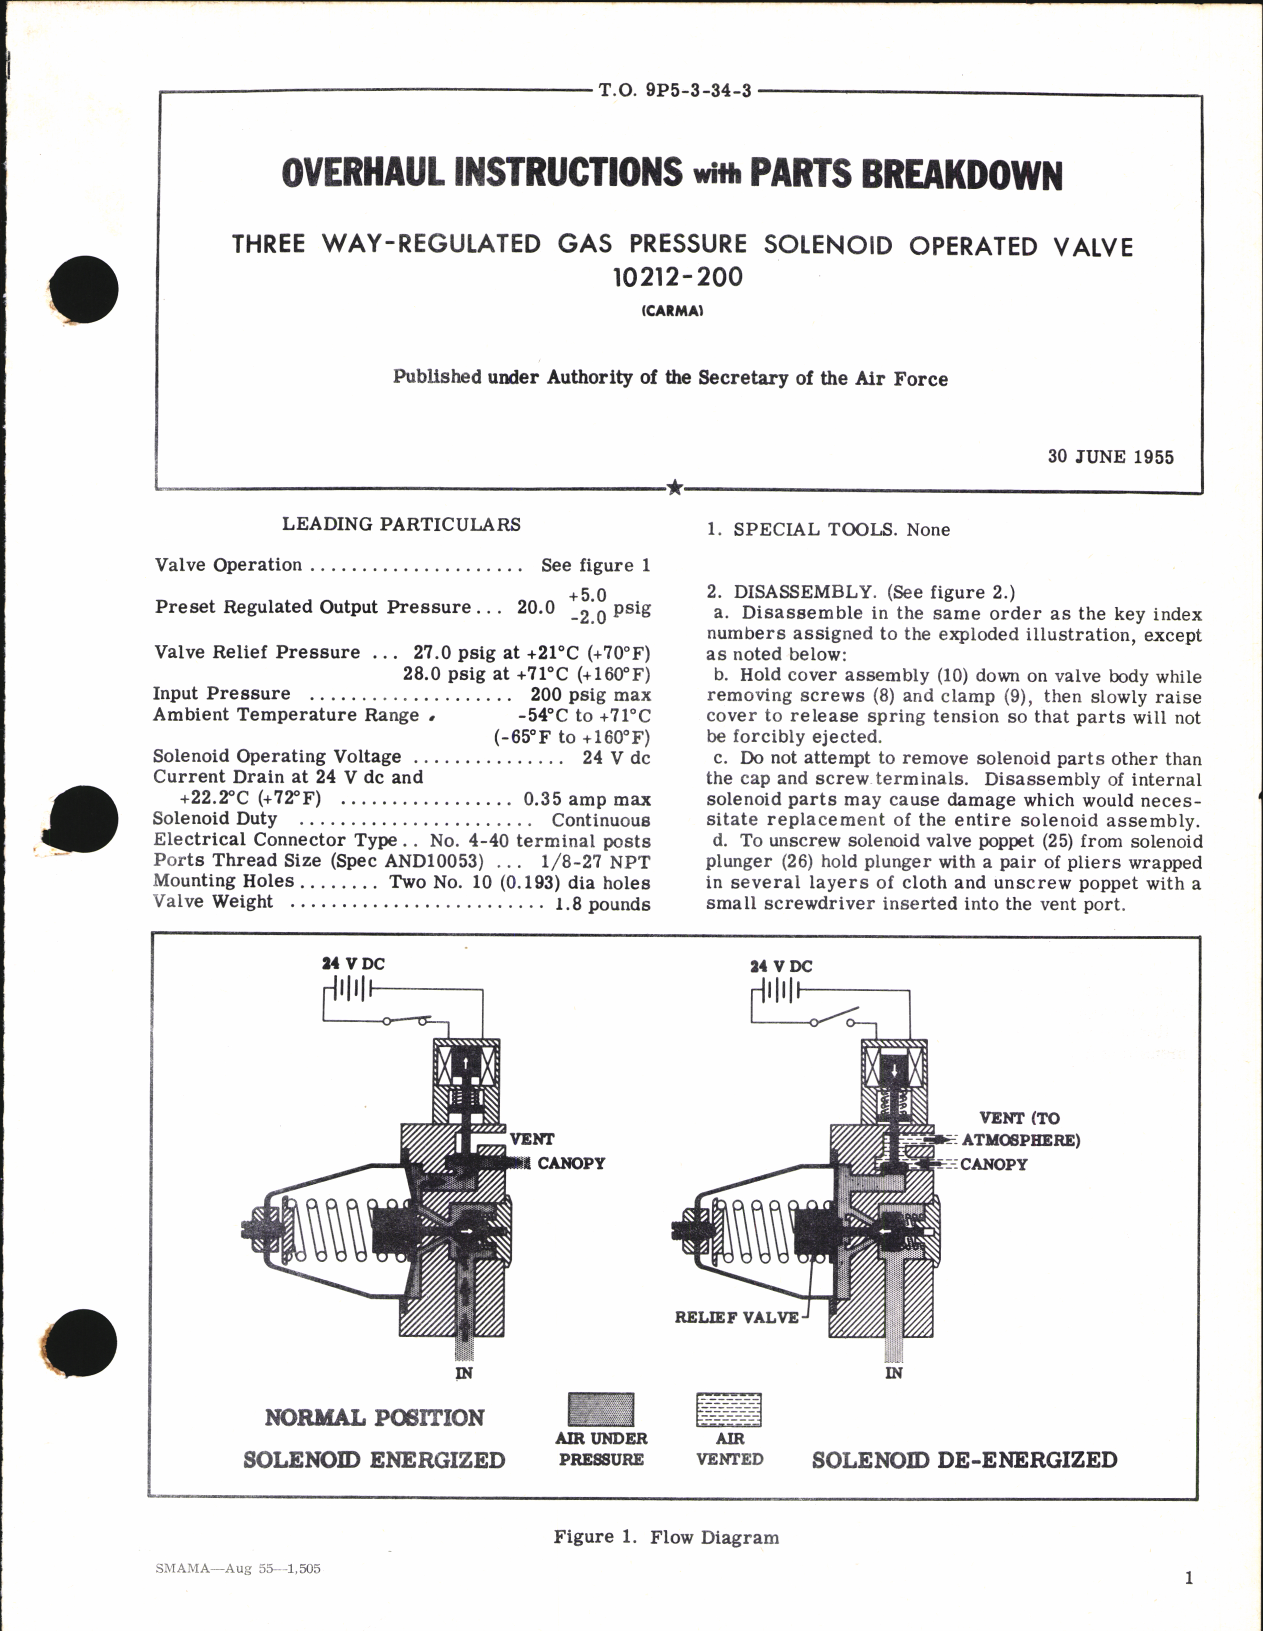 Sample page 1 from AirCorps Library document: Overhaul Instructions with Parts Breakdown for Three Way-Regulated Gas Pressure Solenoid Operated Valve 10212-200